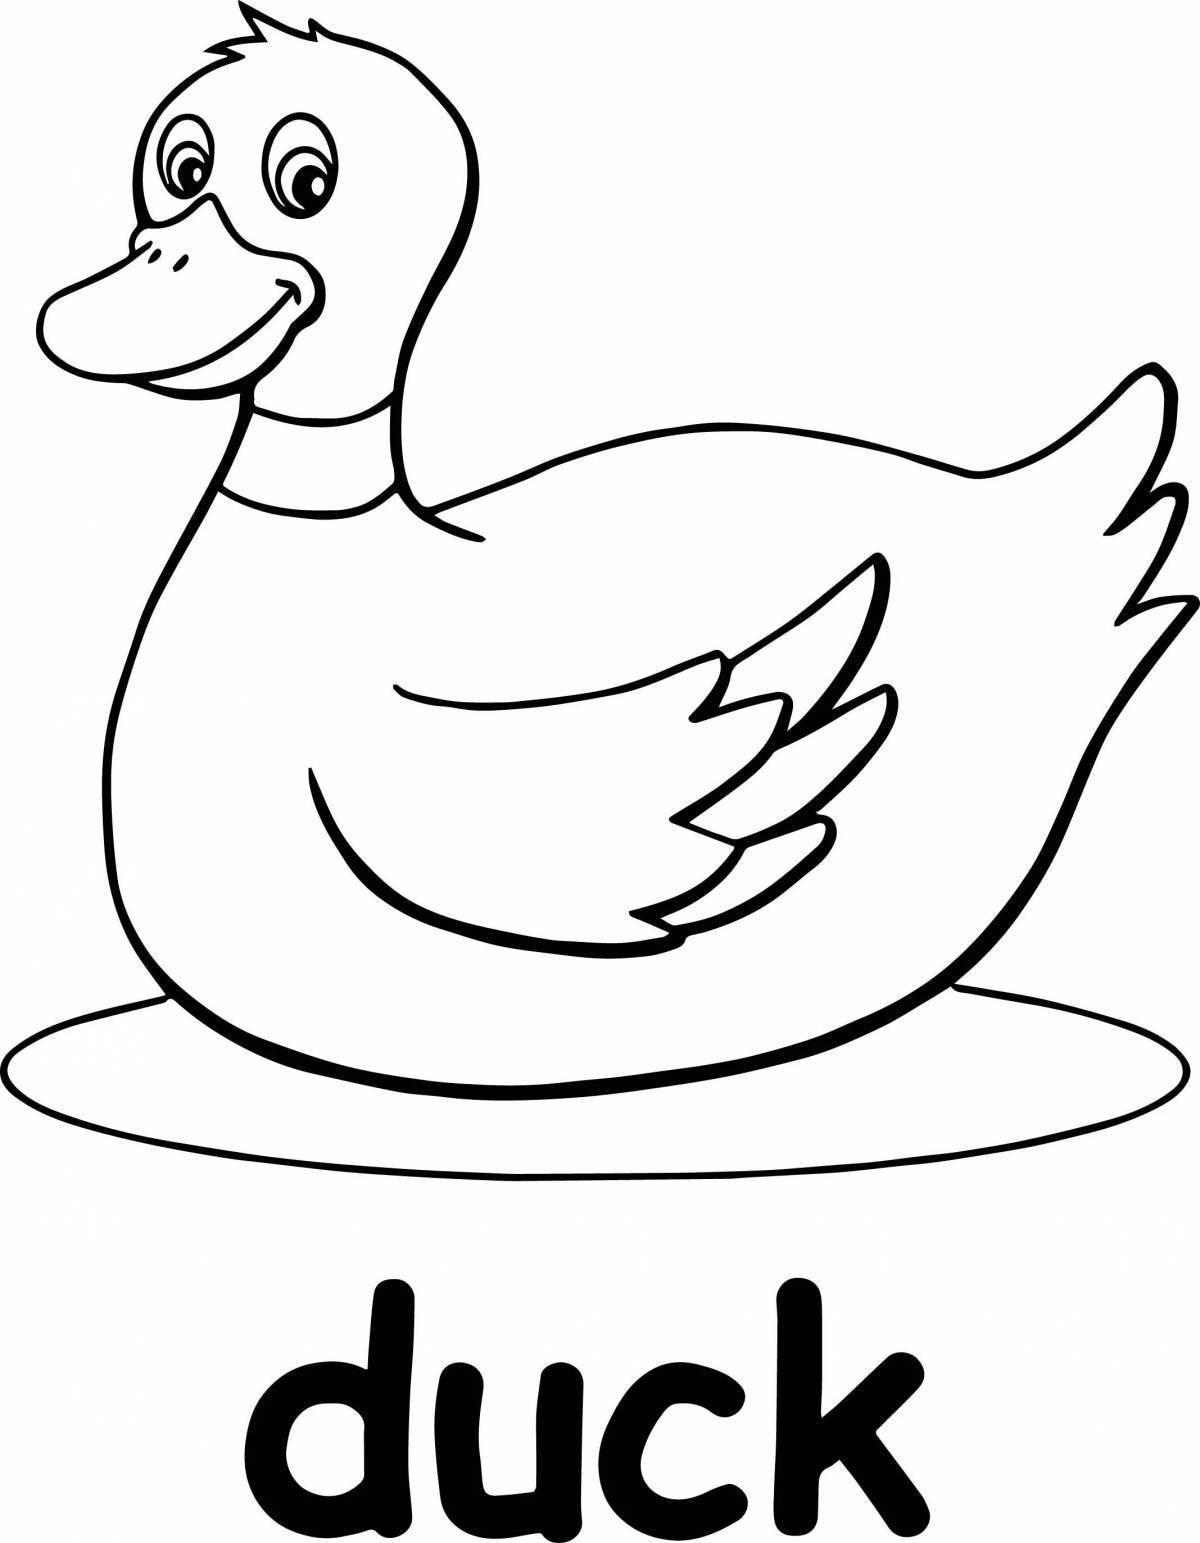 Attractive lalanfant duck coloring book